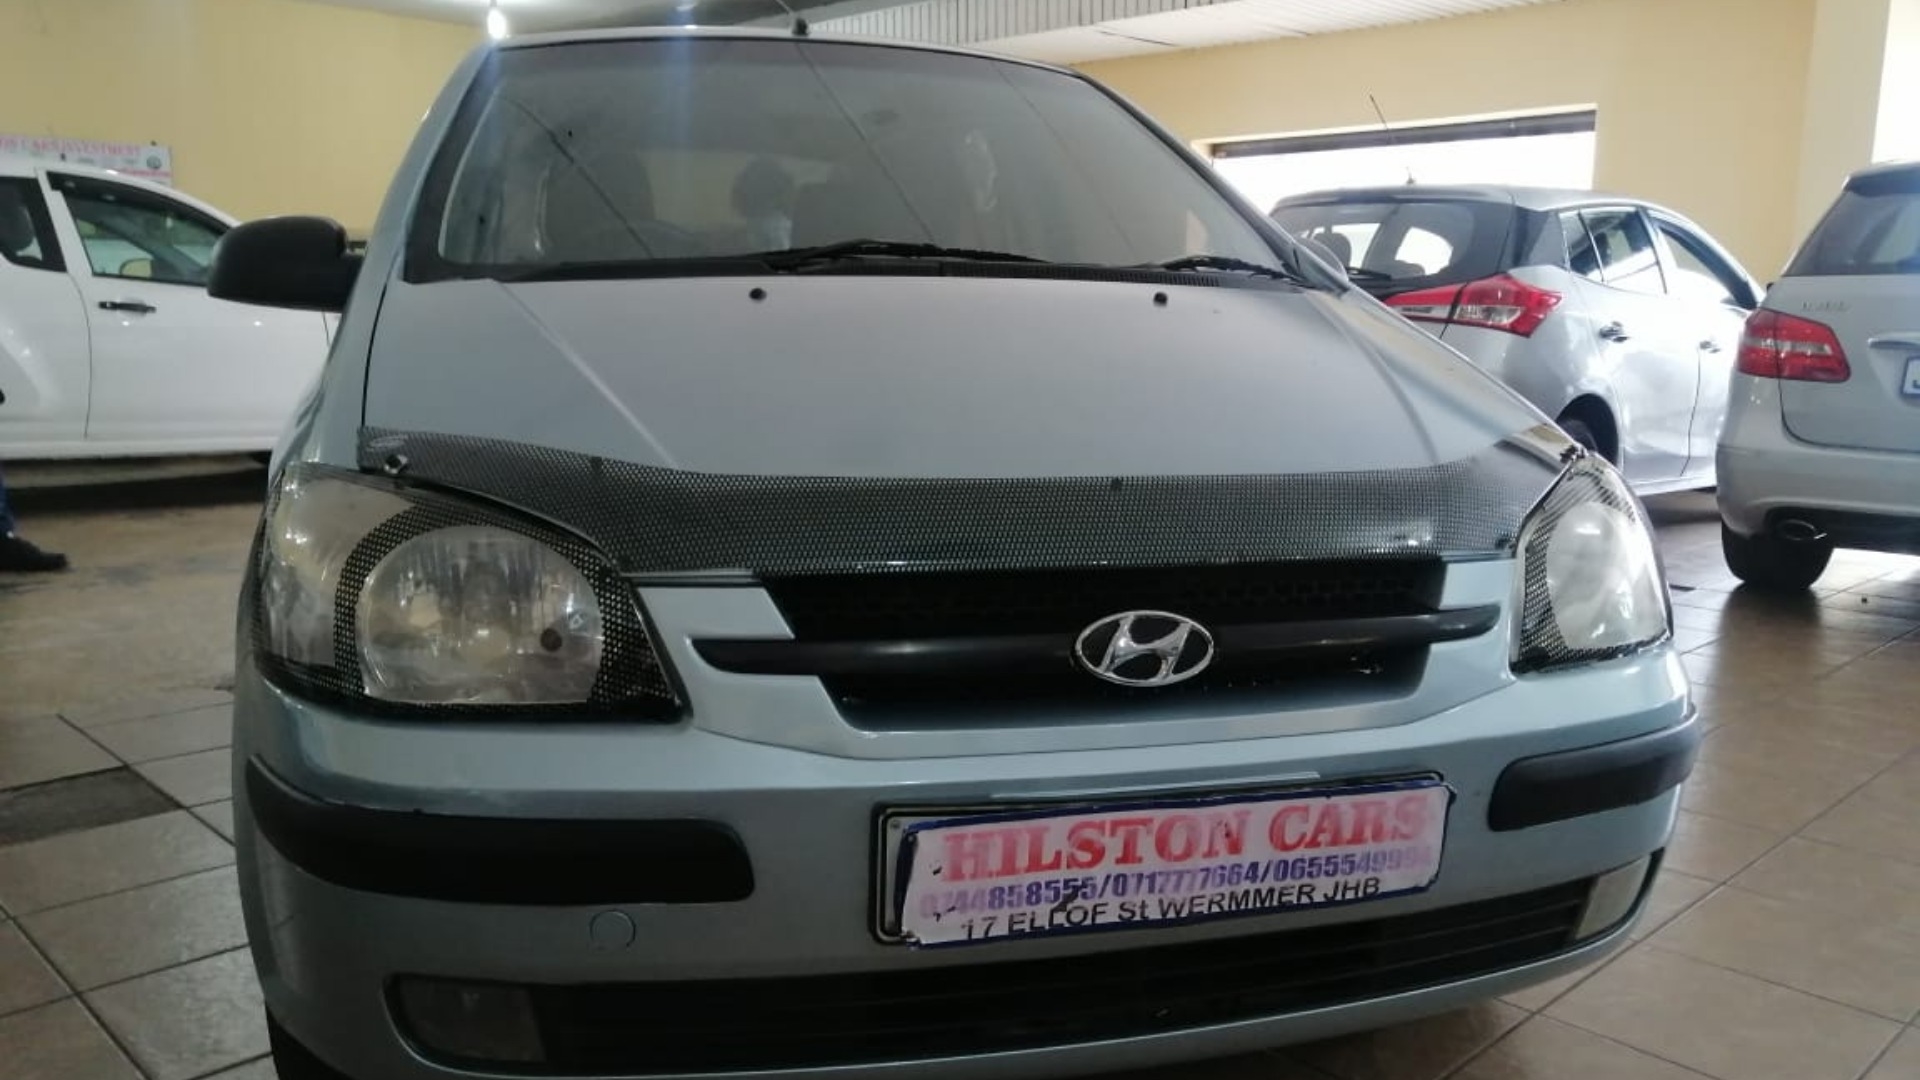 Used 2004 Hyundai 1.6 for sale in Gauteng Auto Mart